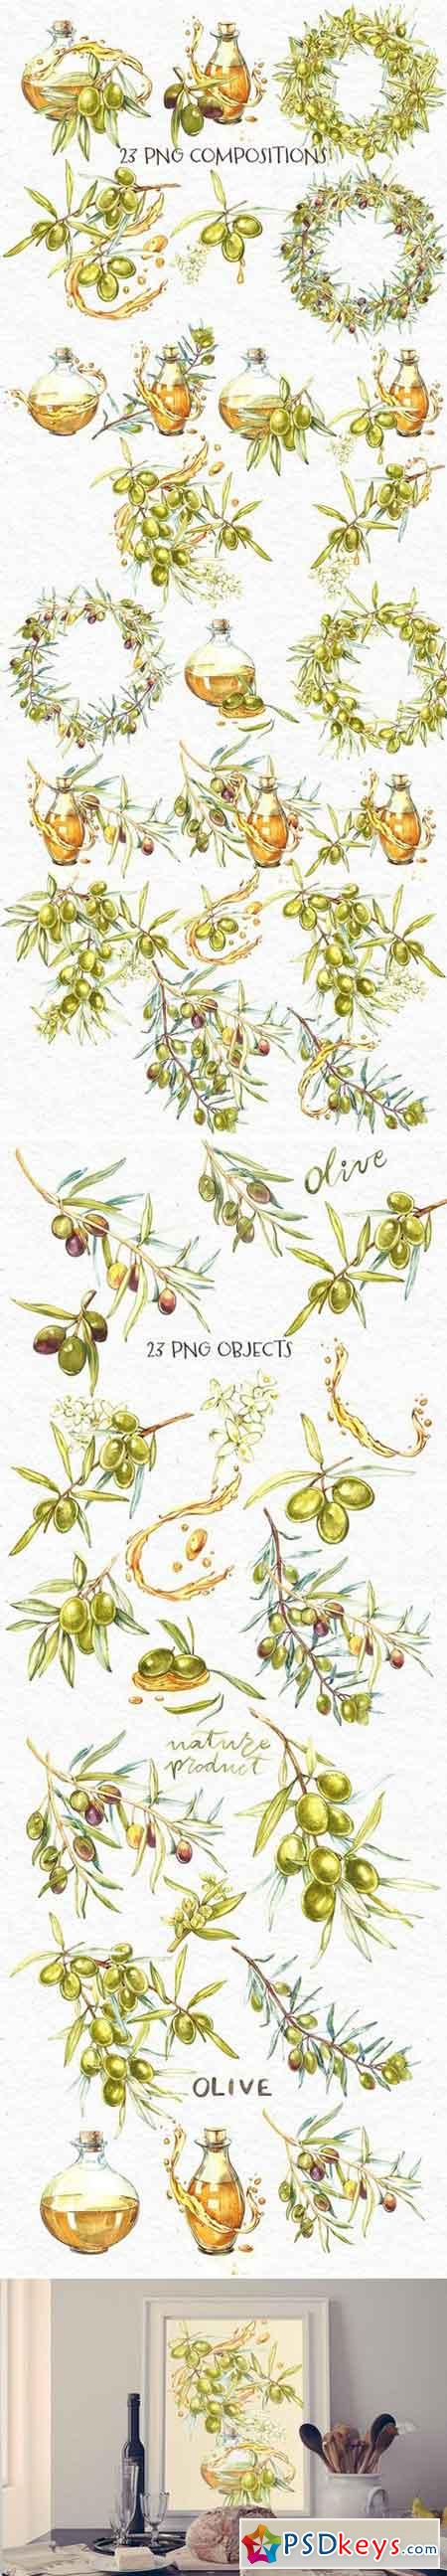 Olive Watercolor clipart 2041861